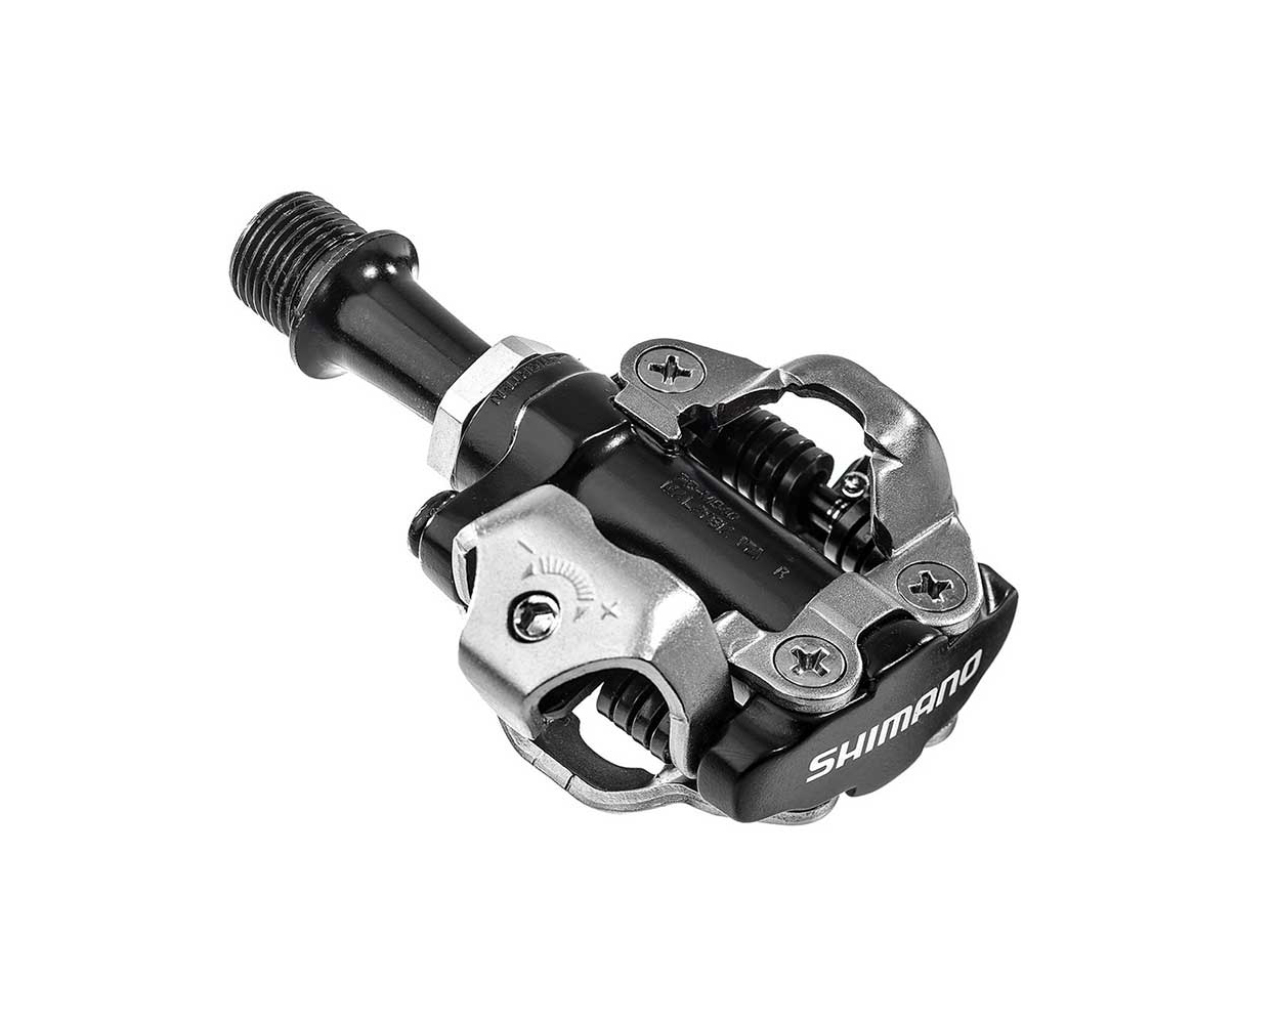 Shimano M540 Spd Pedals Merlin Cycles